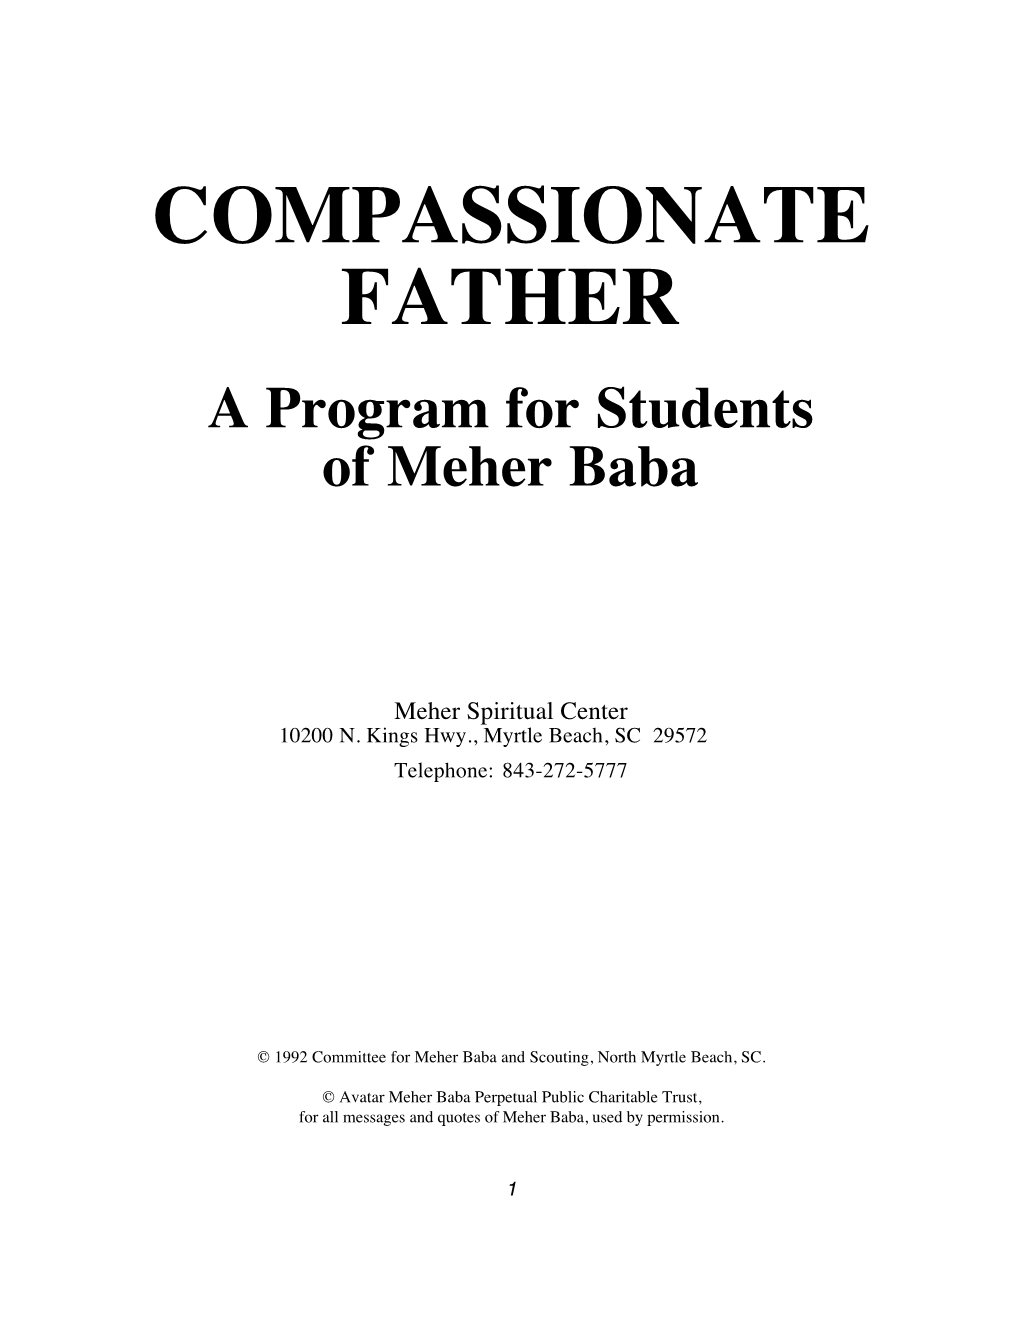 COMPASSIONATE FATHER a Program for Students of Meher Baba